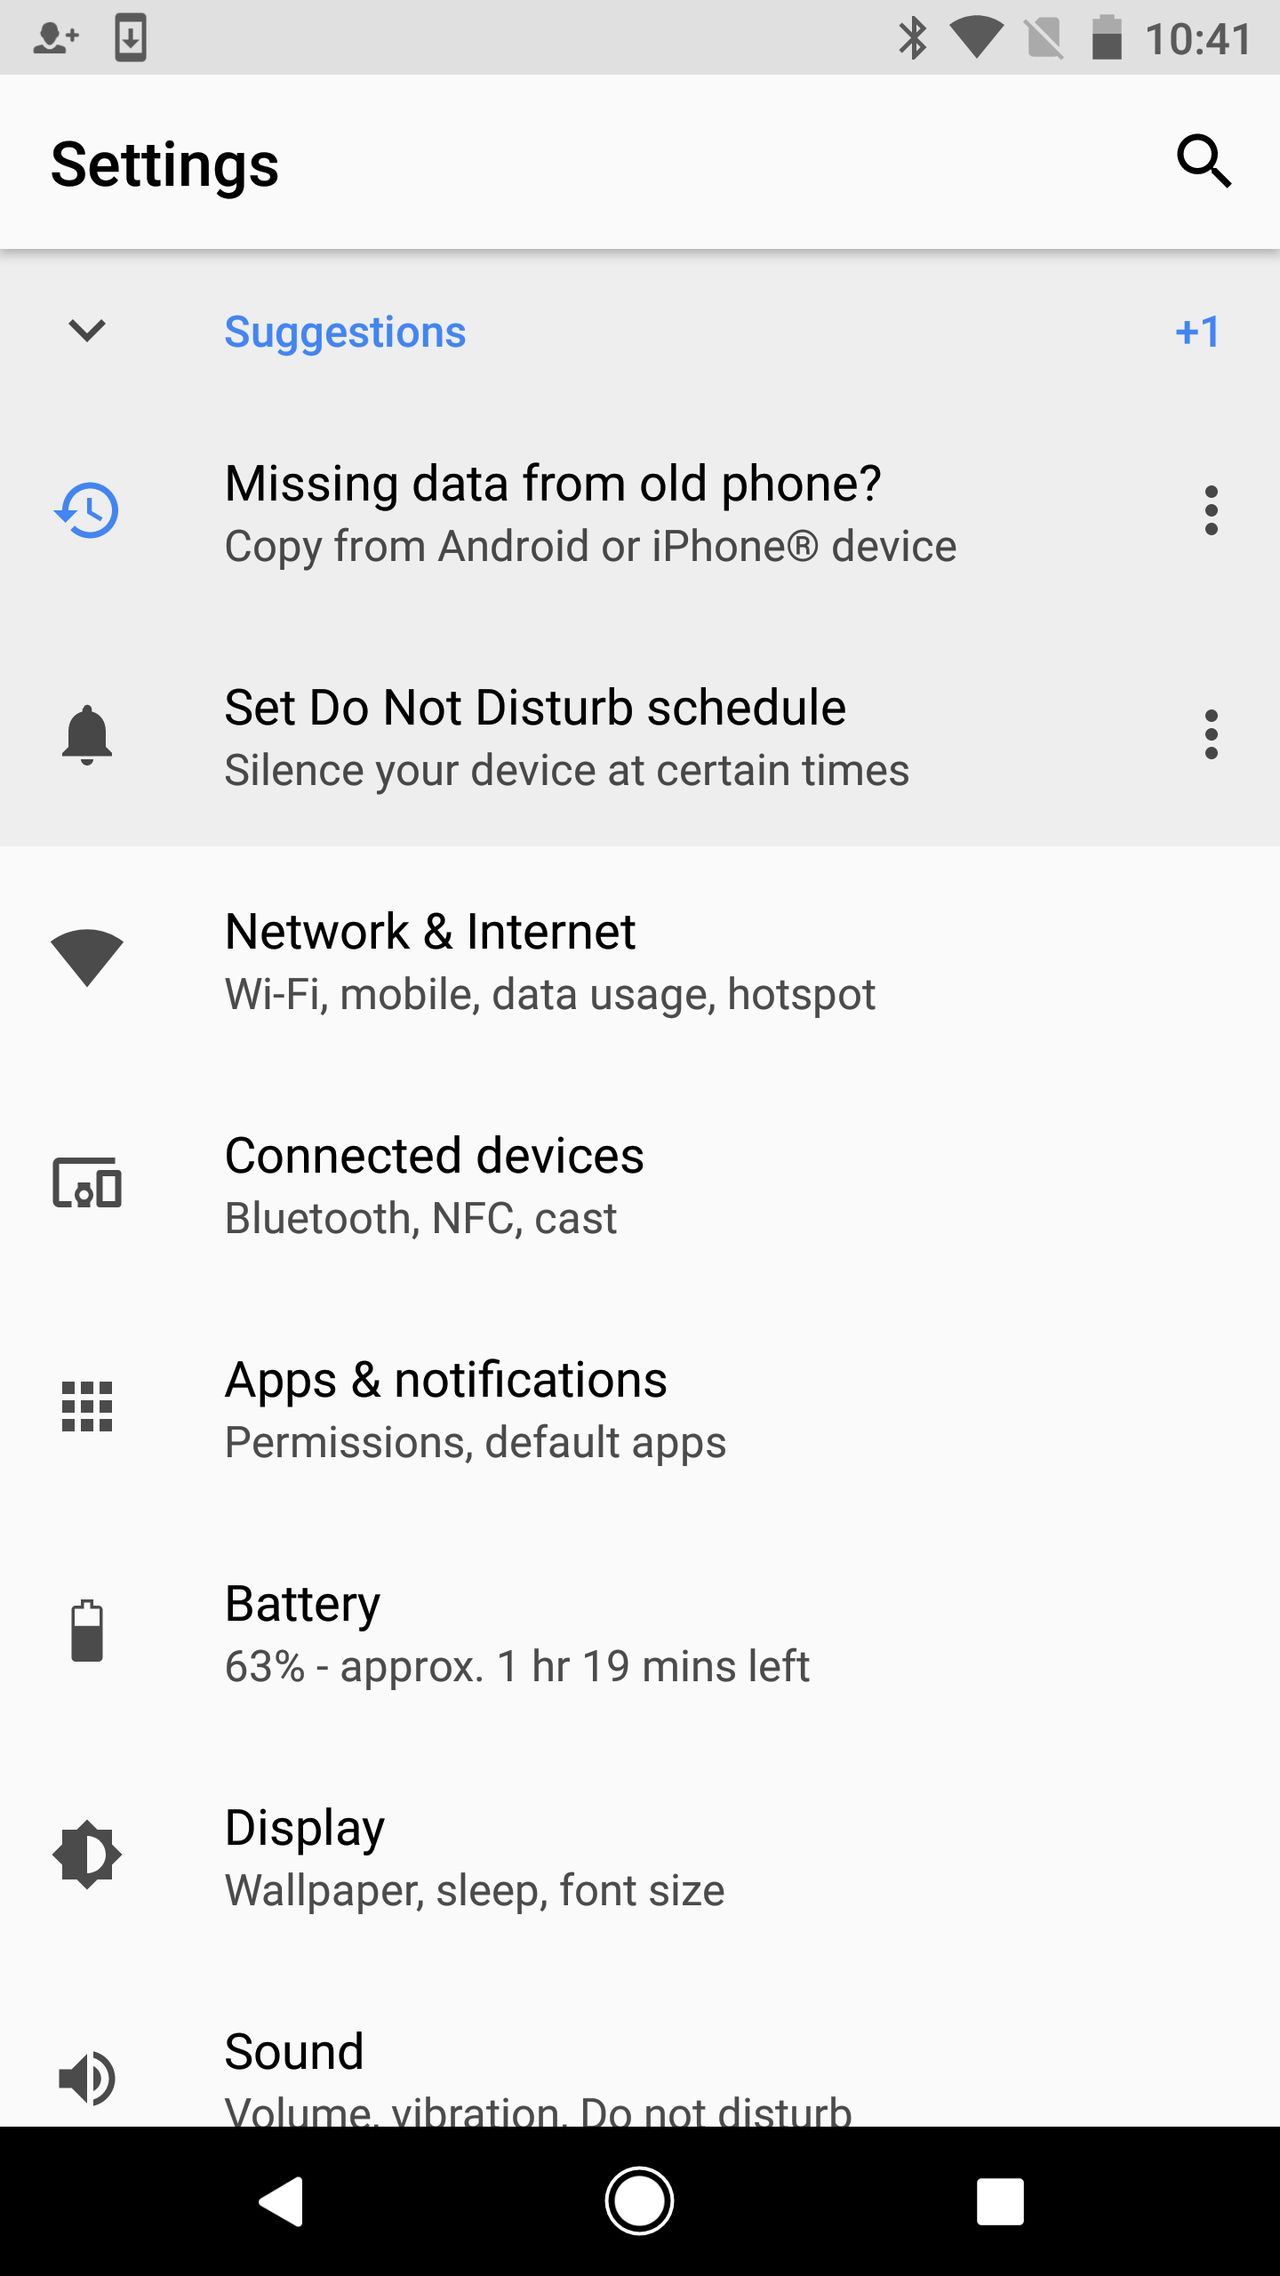 http://www.androidpolice.com/2017/03/21/android-o-feature-spotlight-the-settings-app-has-been-completely-overhauled/